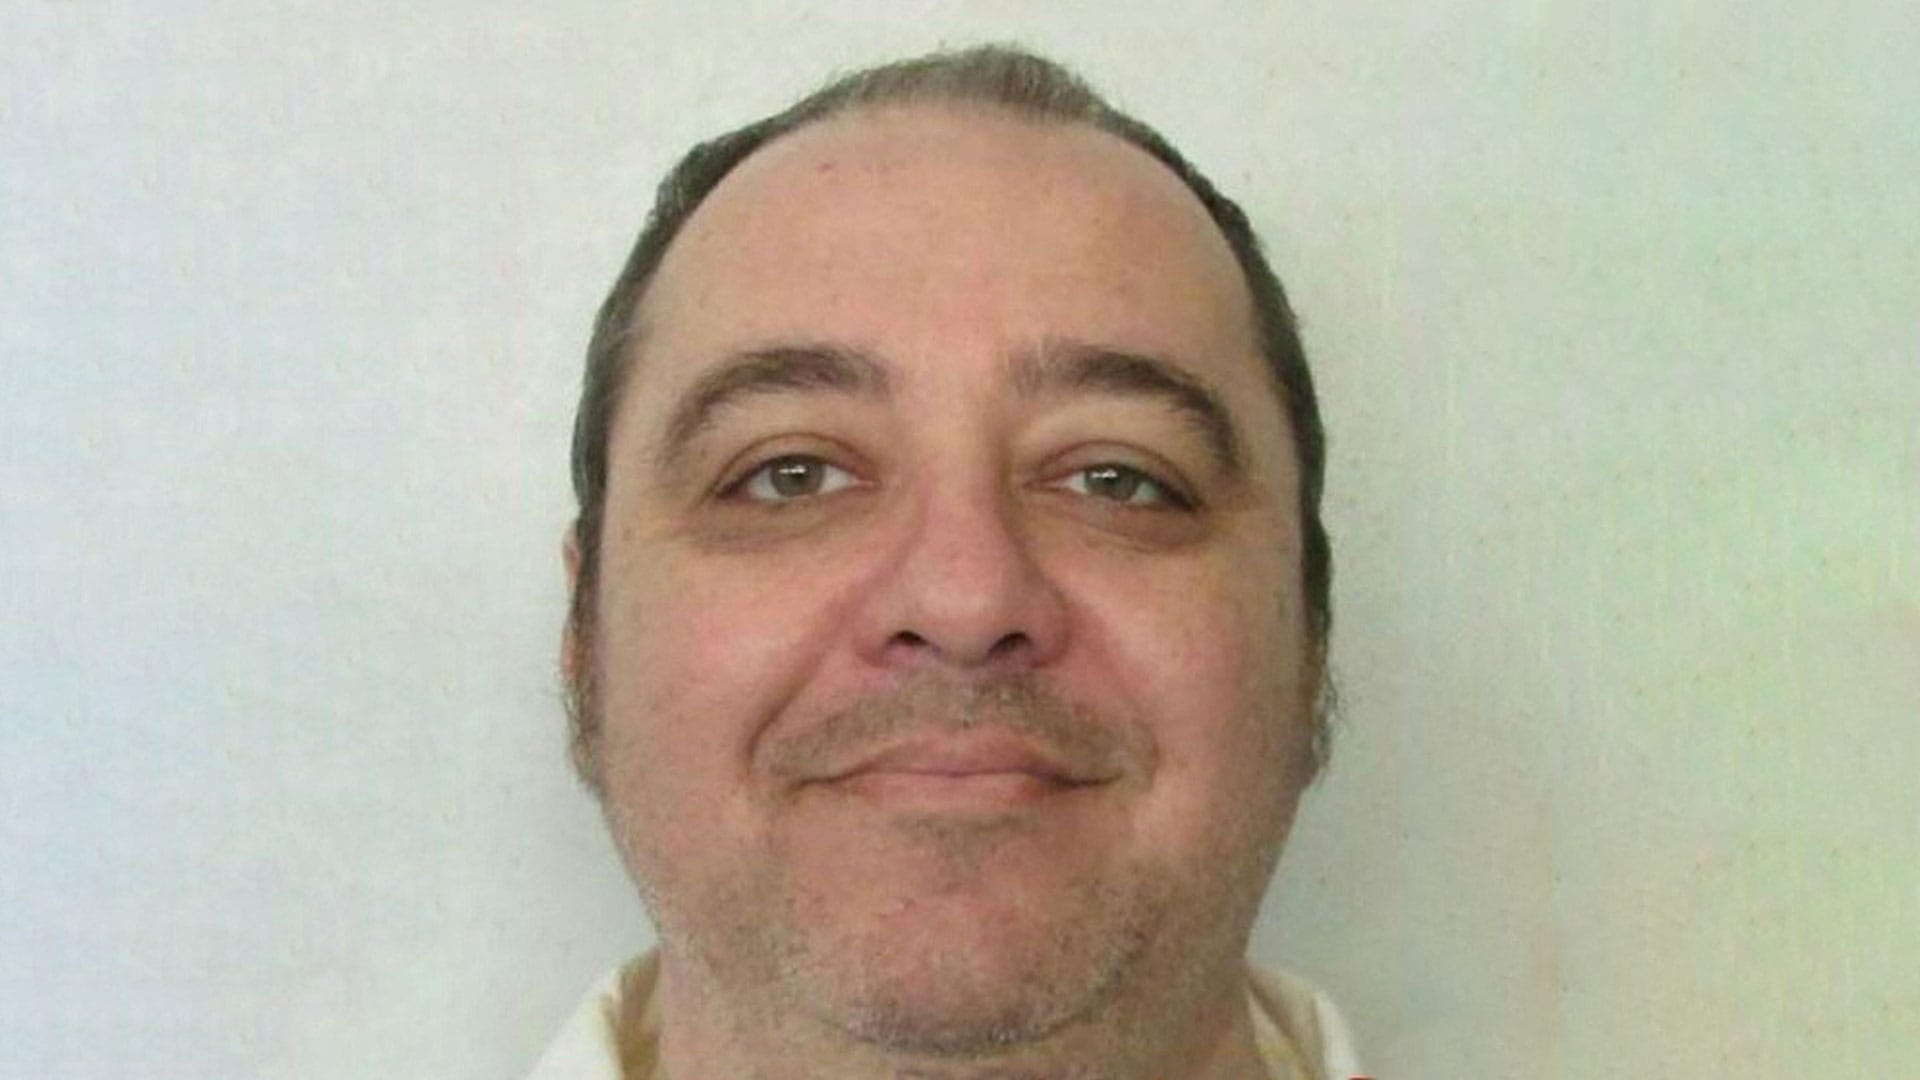 Inmate Kenneth Smith slammed first-ever nitrogen gas execution as 'step backward' before he died in 22-minute ordeal